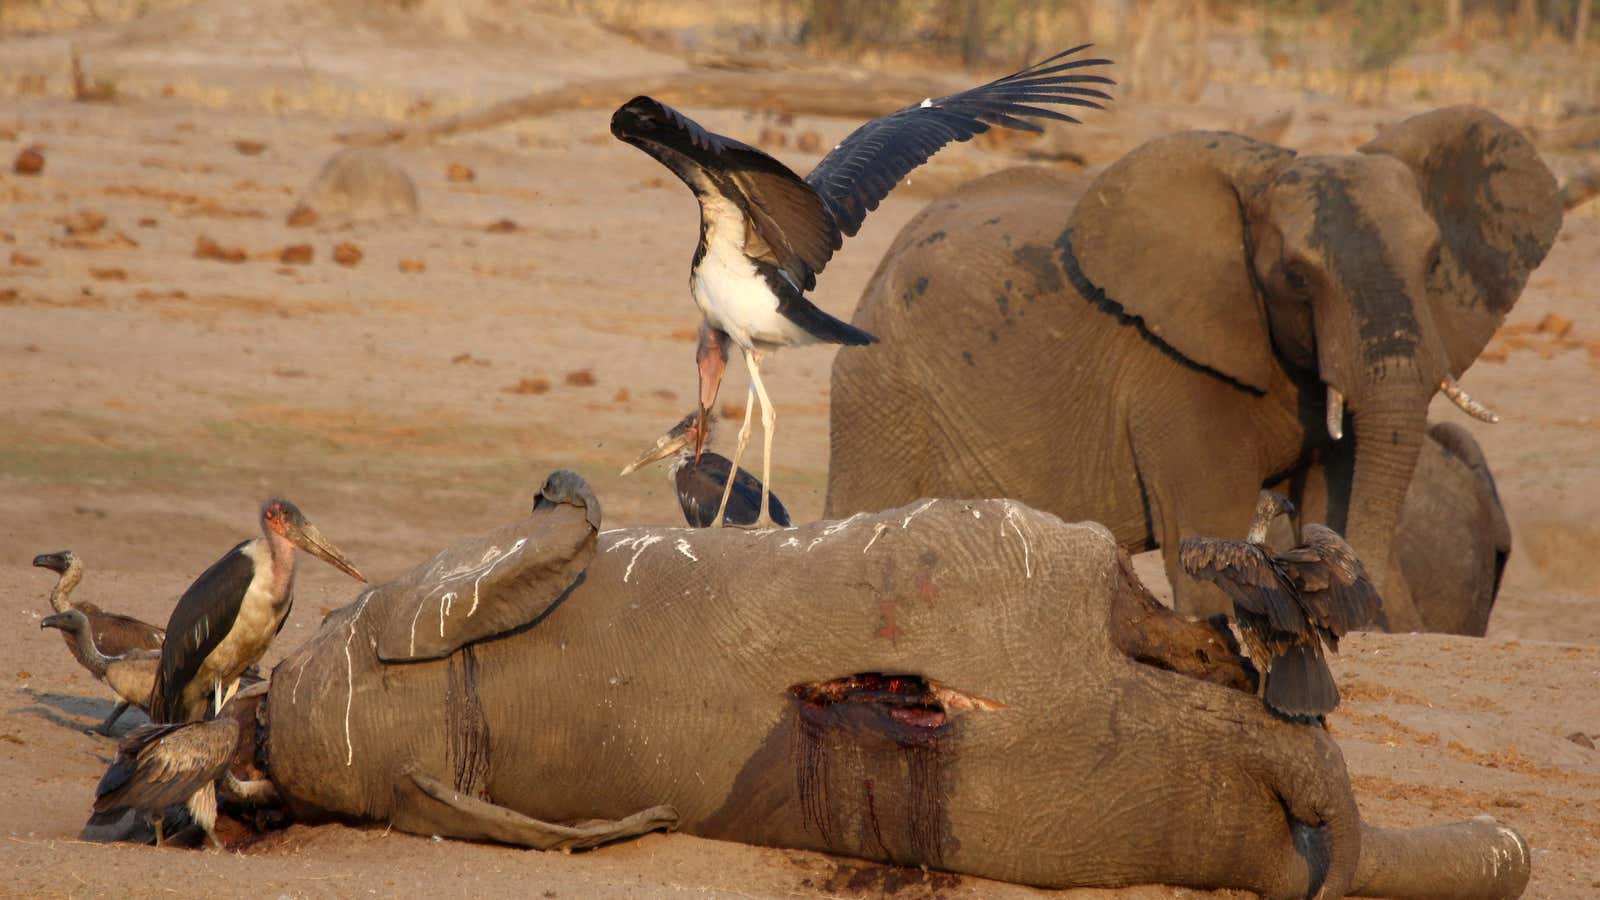 A marabou stork stands on an elephant carcass at a watering hole inside Hwange National Park, in Zimbabwe, Oct. 23, 2019.